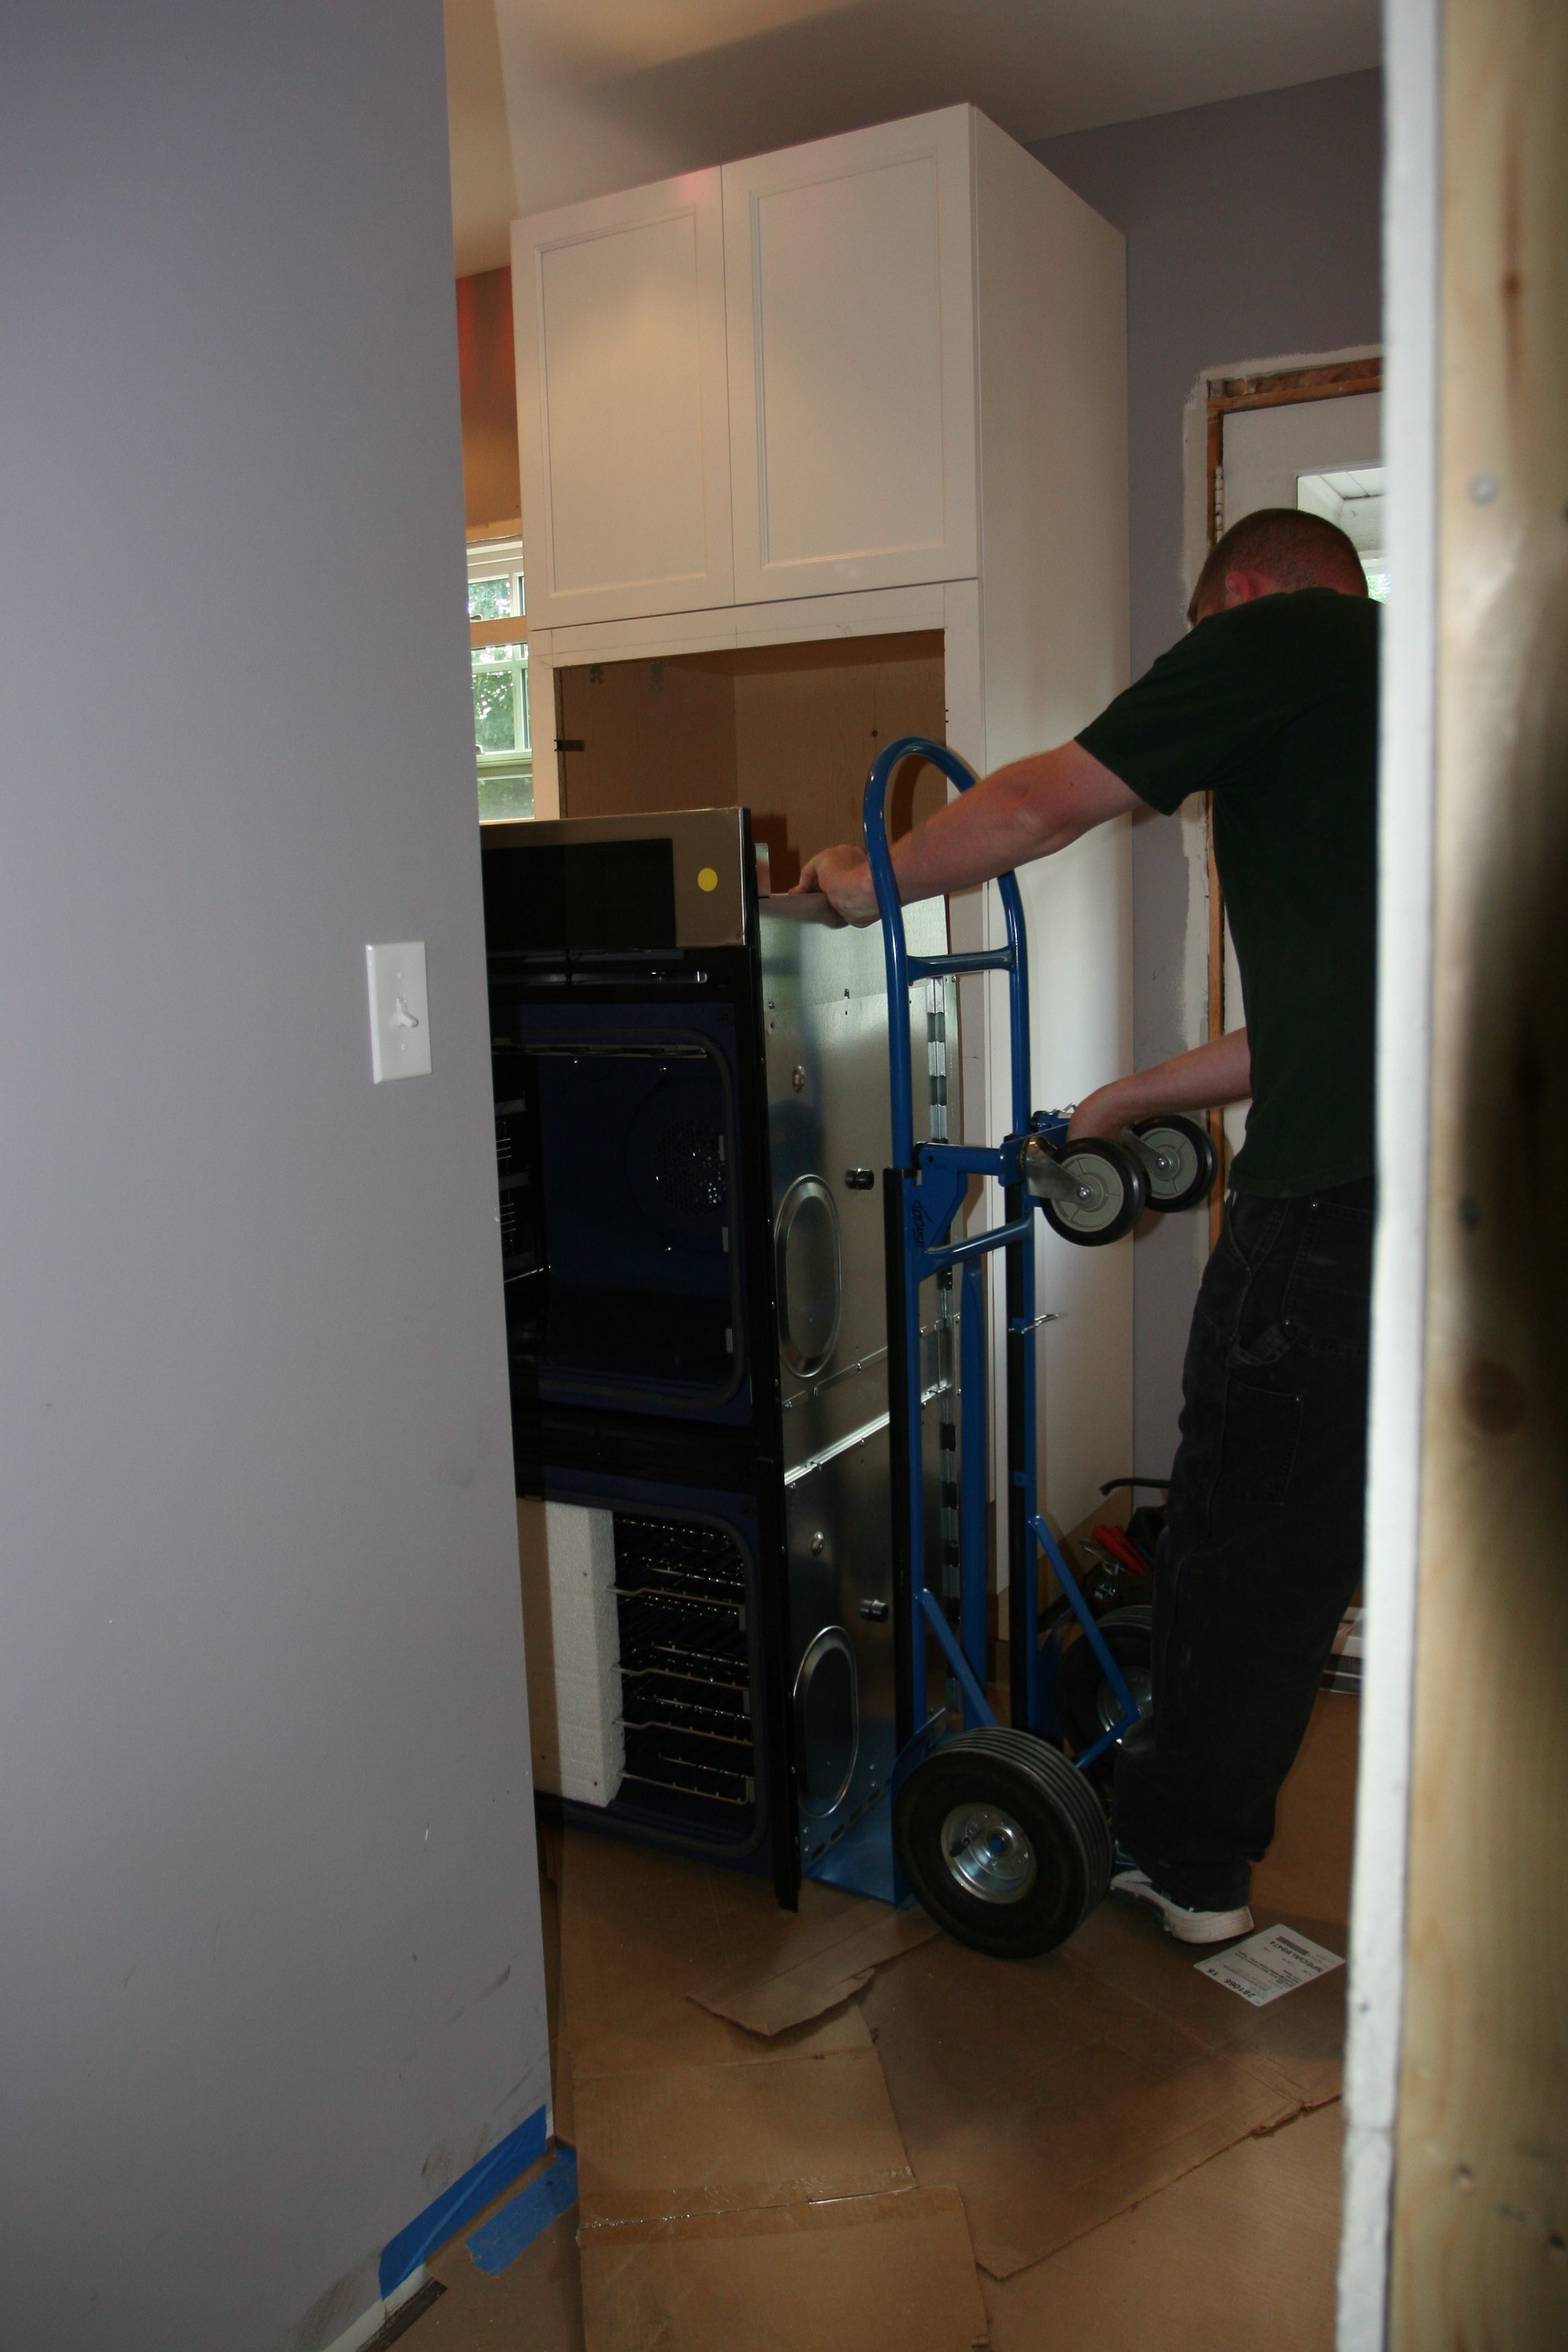 Brad setting up for wall oven install. (This was before Dave and Brad figured out that the cabinet needed some shoring up to be an effective (read: safe) place to mount a 300+ lb. appliance with moving parts.